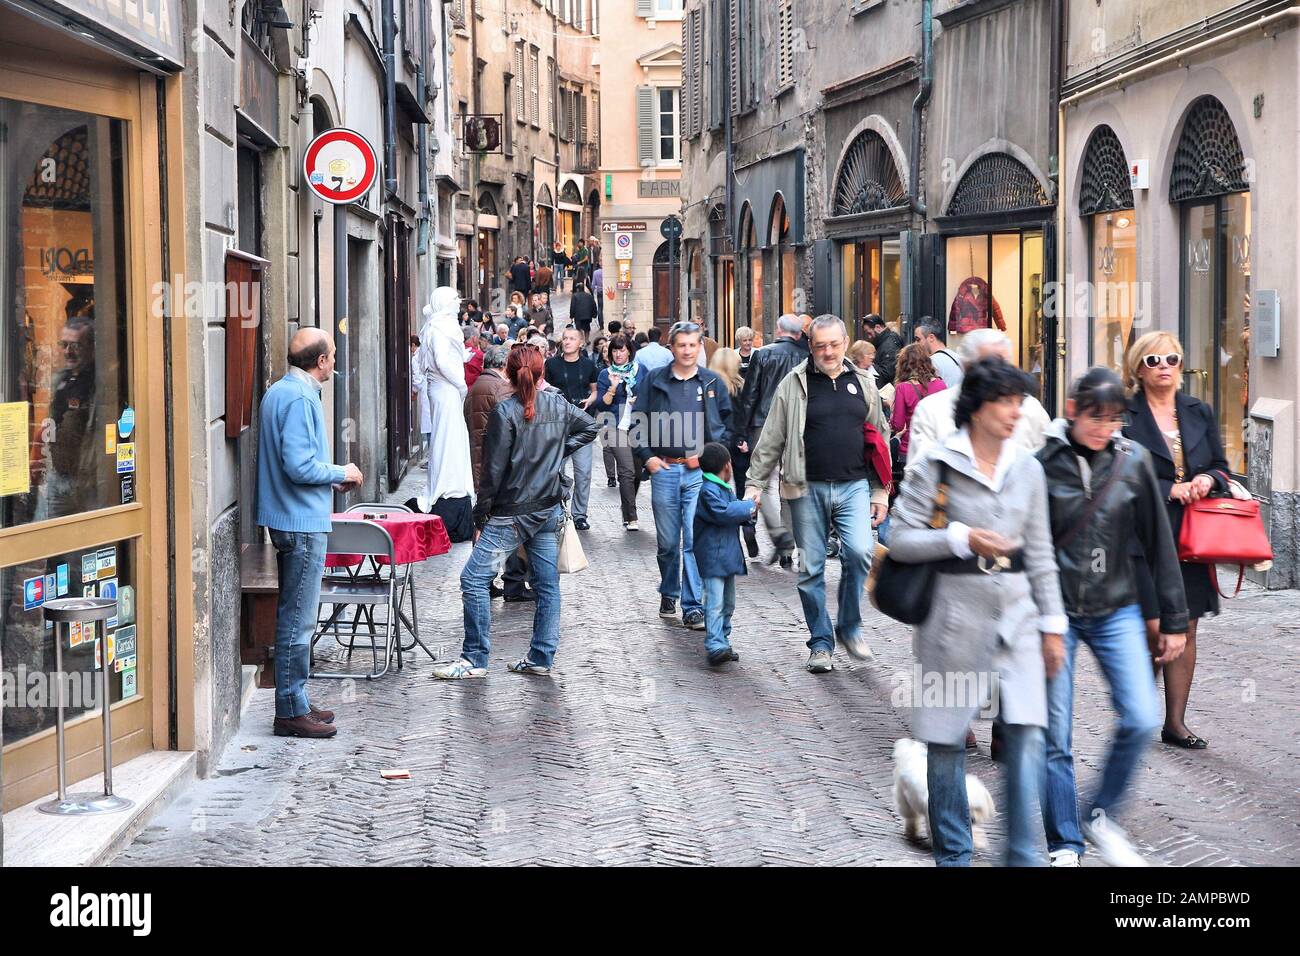 BERGAMO, ITALY - OCTOBER 20, 2012: People visit Old Town in Bergamo, Italy. In 2011 841,624 tourists visited Bergamo Province, among them 324,685 fore Stock Photo